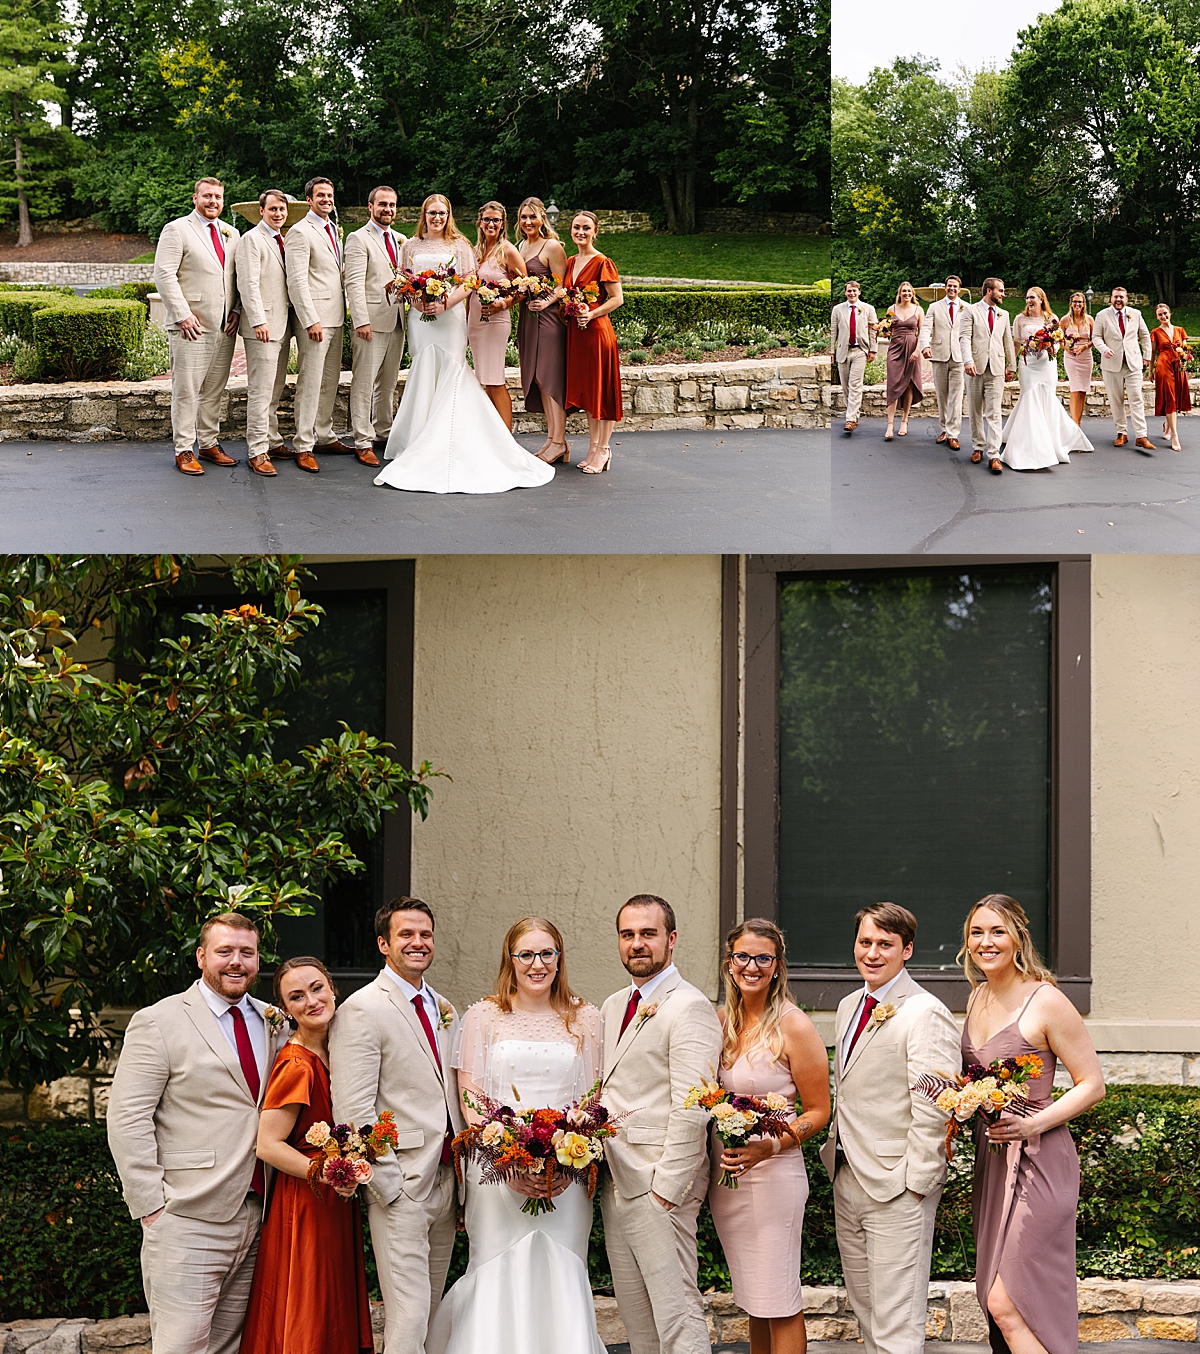 couple with bridal party and groomsmen holding wedding bouquets